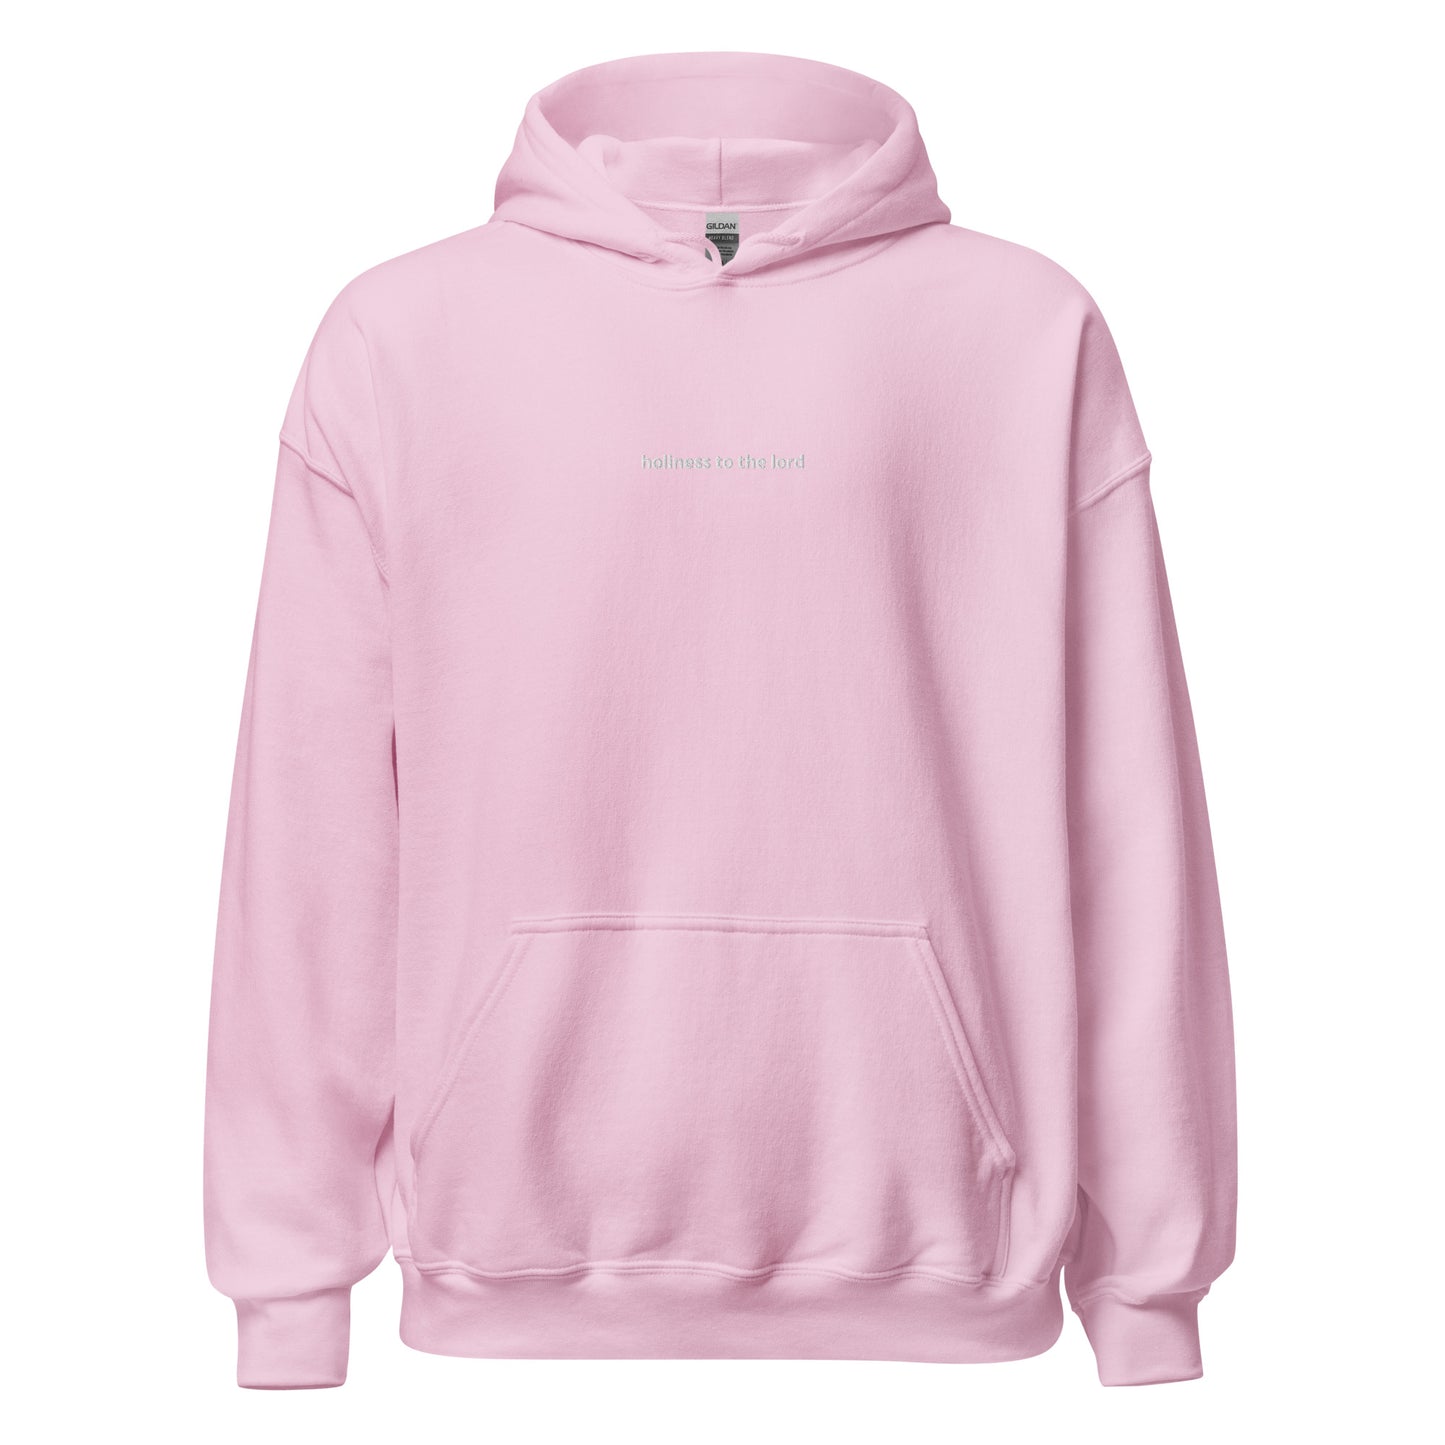 Holiness to the Lord Hoodie